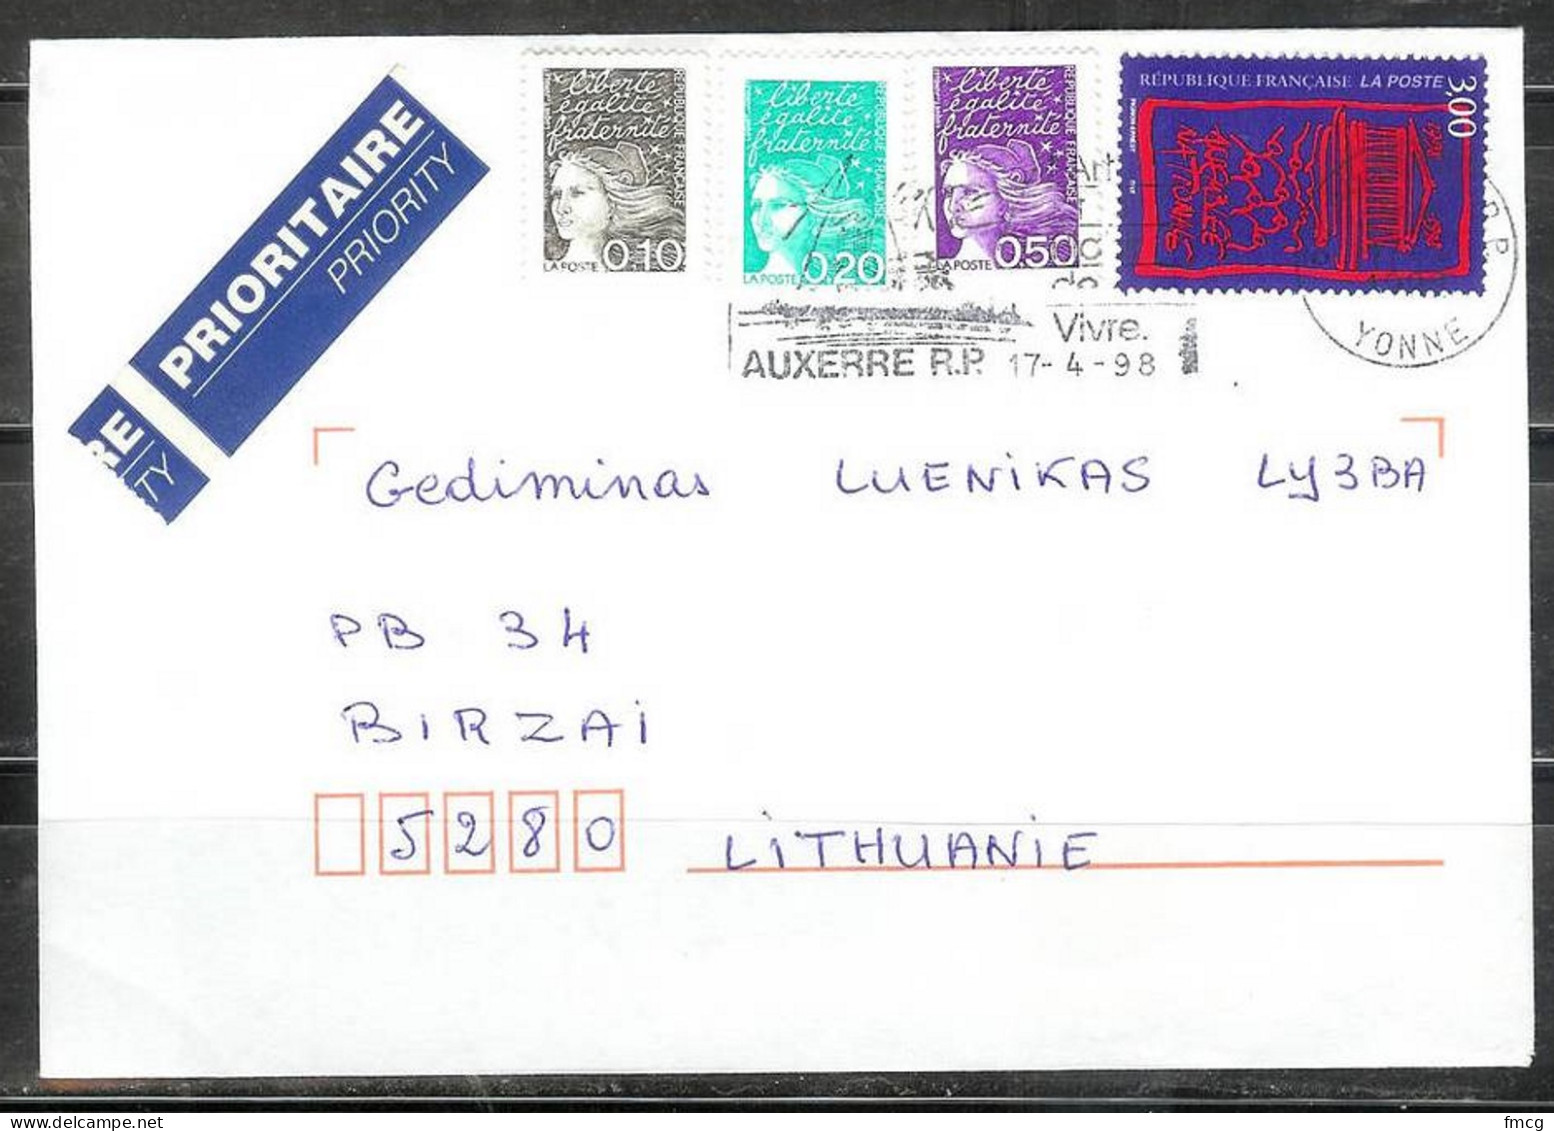  1998 National Assembly, Auxerre (17-4-98) To Lithuania - Briefe U. Dokumente